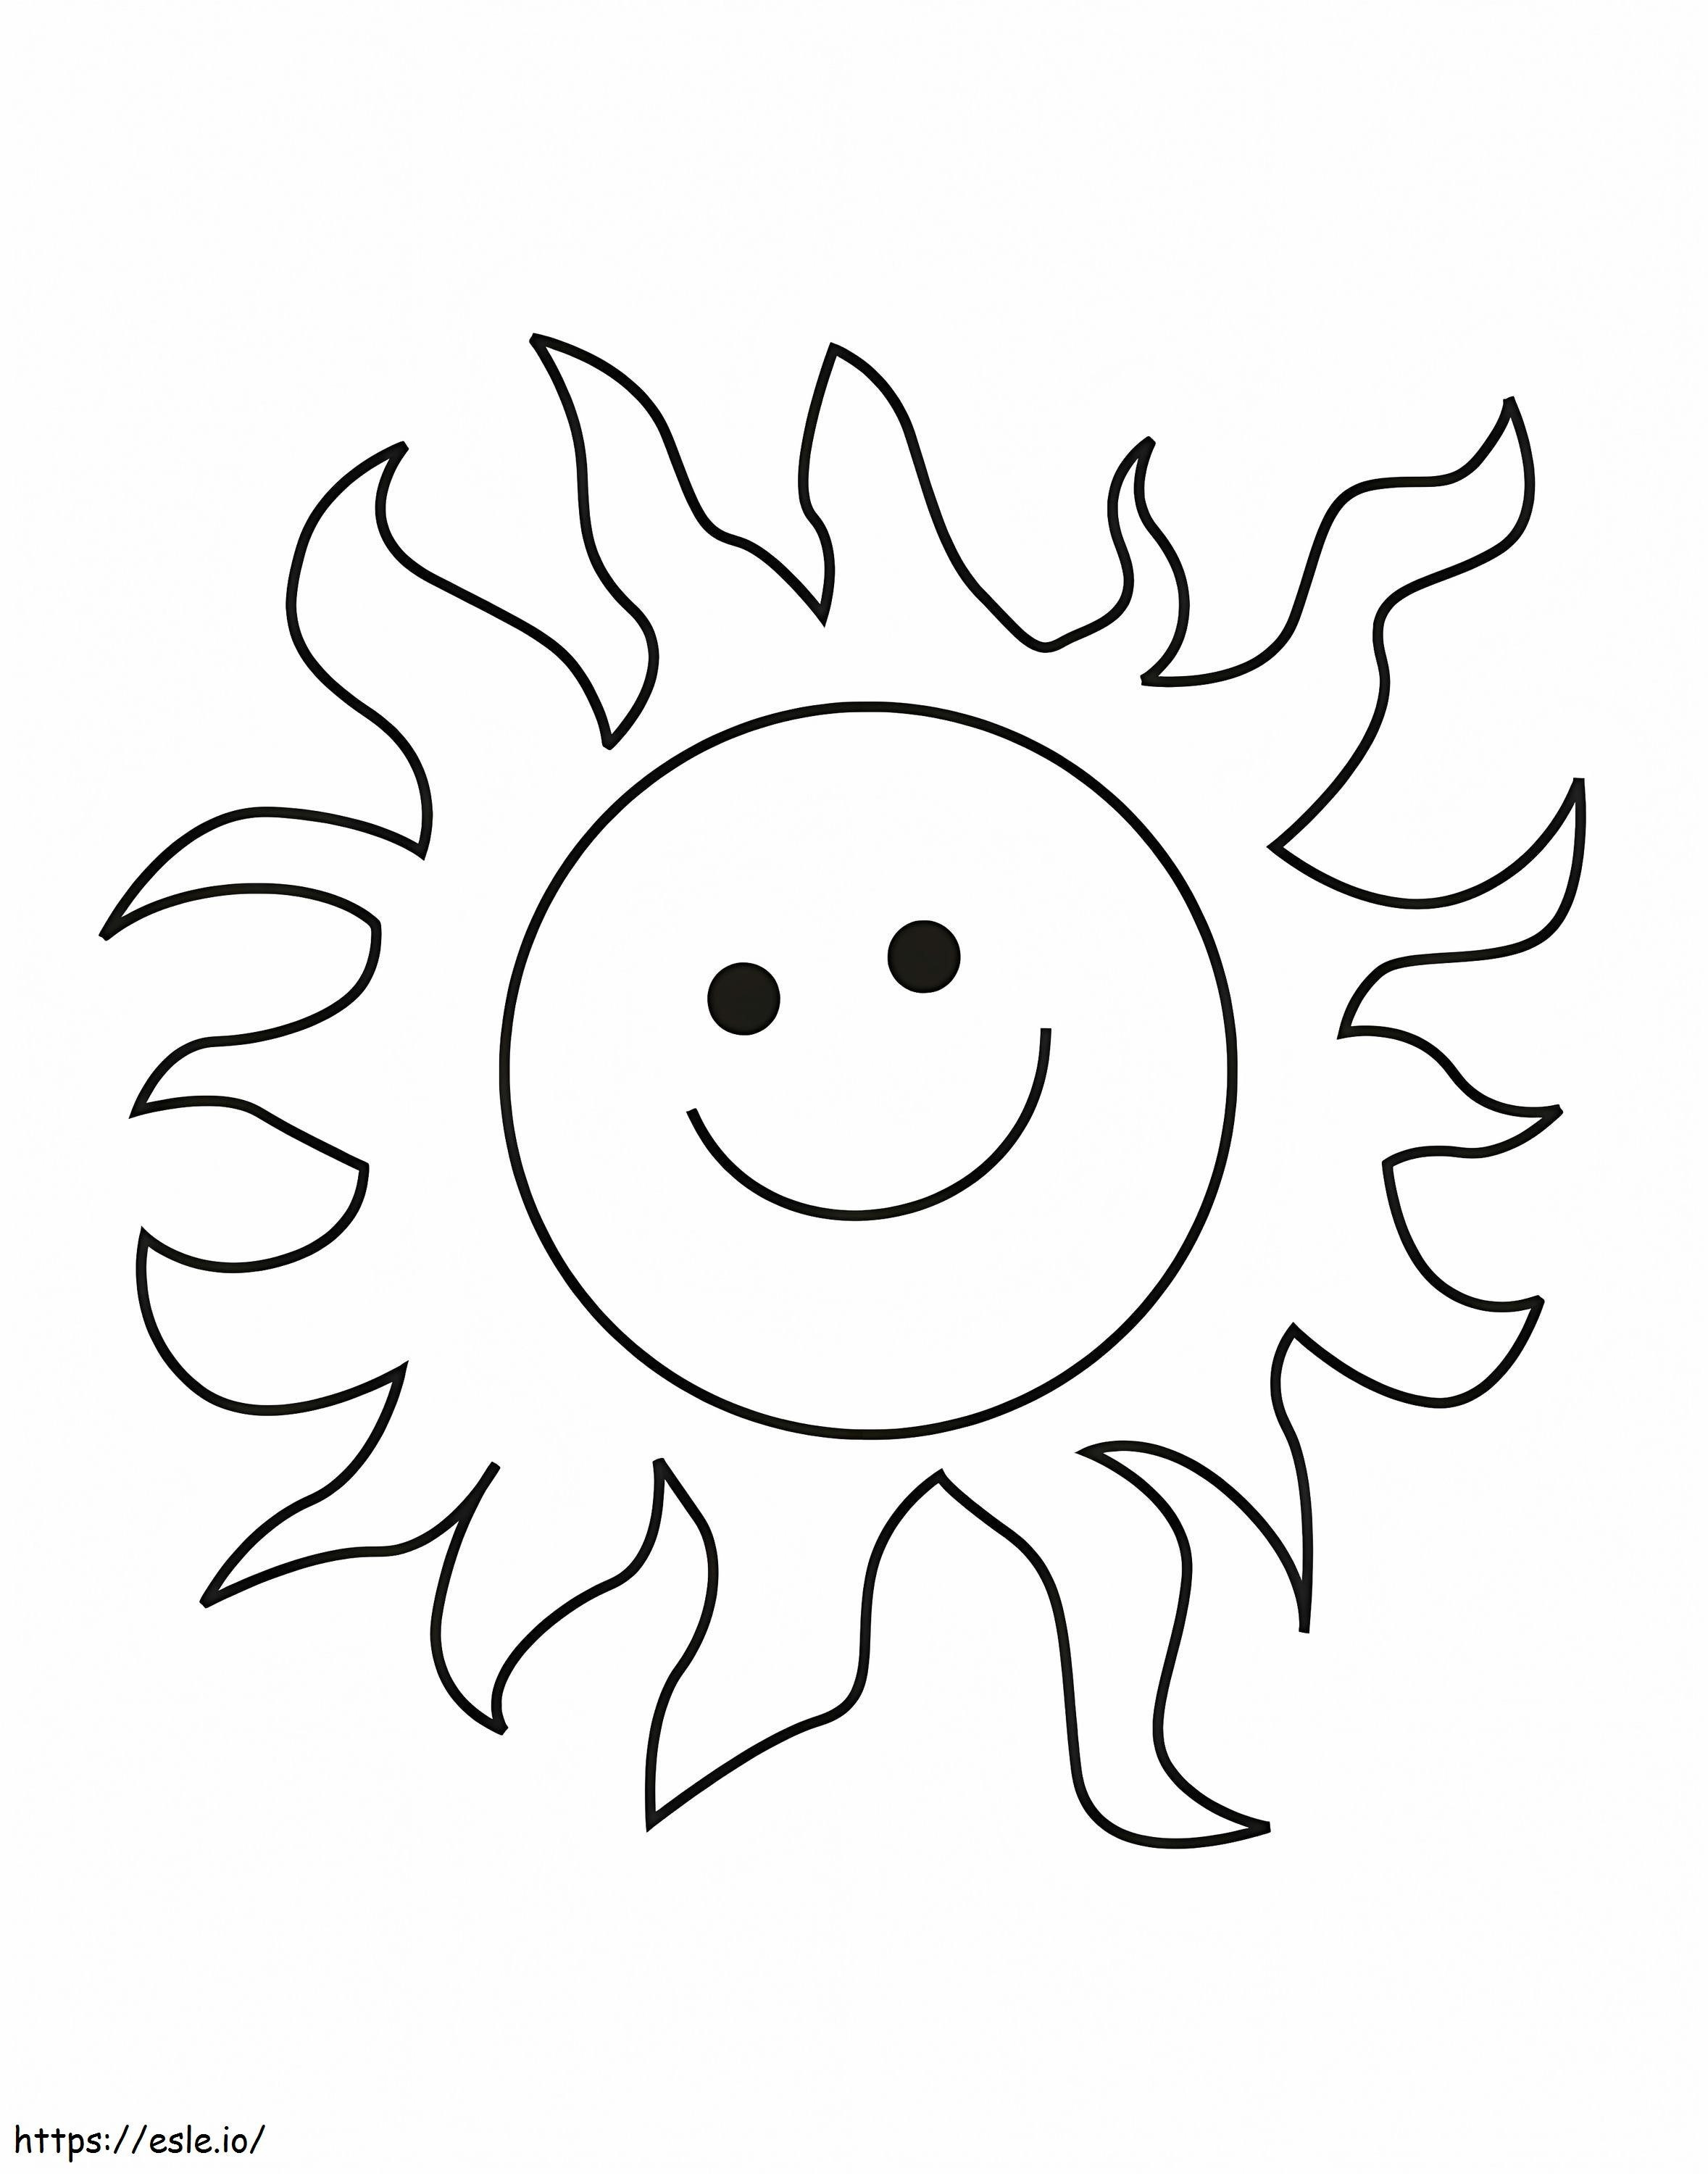 Sun Is Smiling coloring page